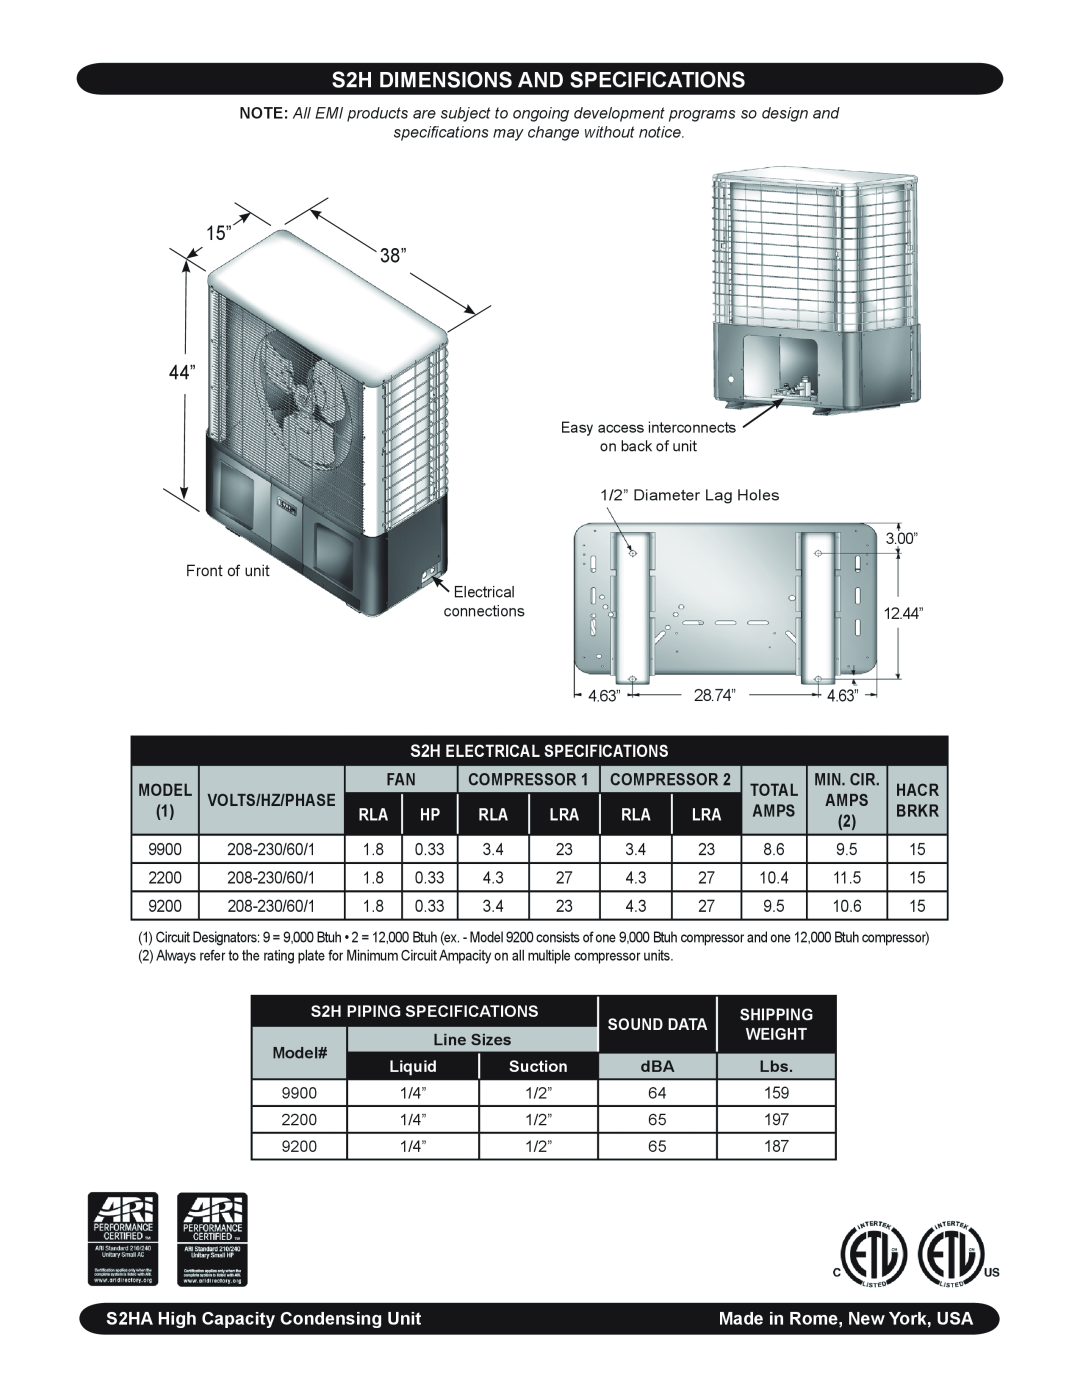 EMI S2H dimensions and specifications, 15” 38” 44”, Amps, S2HA High Capacity Condensing Unit, Model, Compressor, Total 